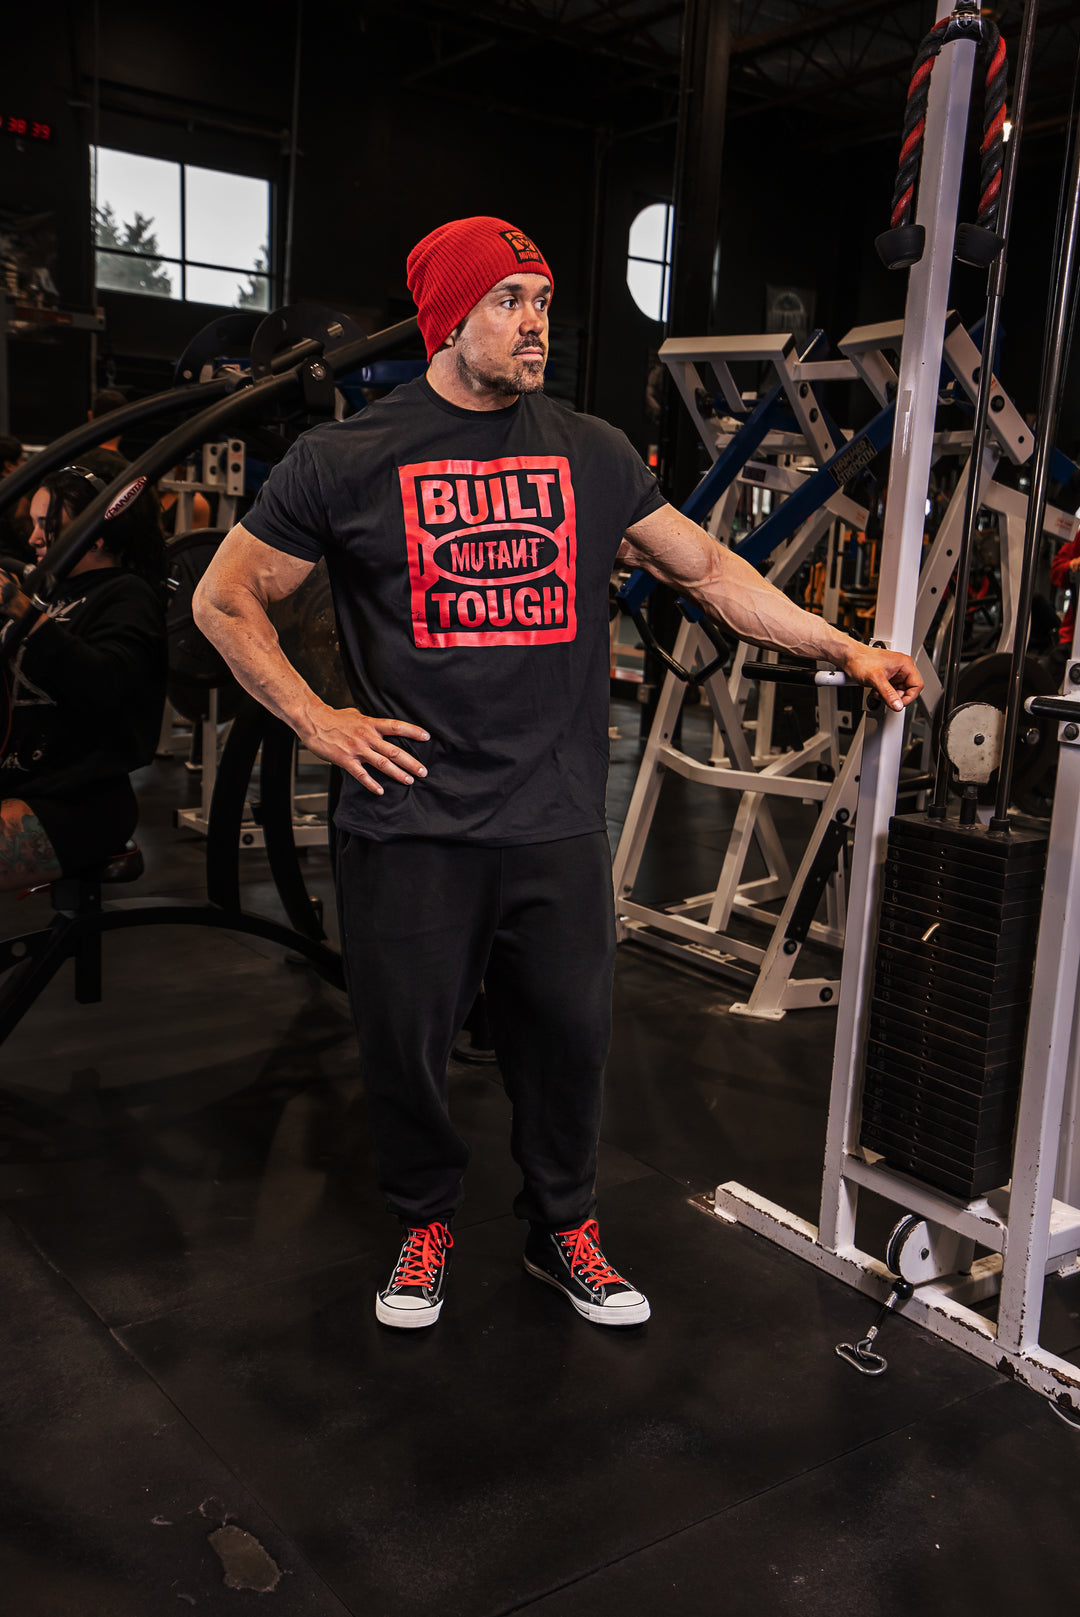 Big Ron Partlow at the gym wearing the black 'MUTANT's Truck Month' t-shirt that features the 'Built Mutant Tough' phrase in red letters.